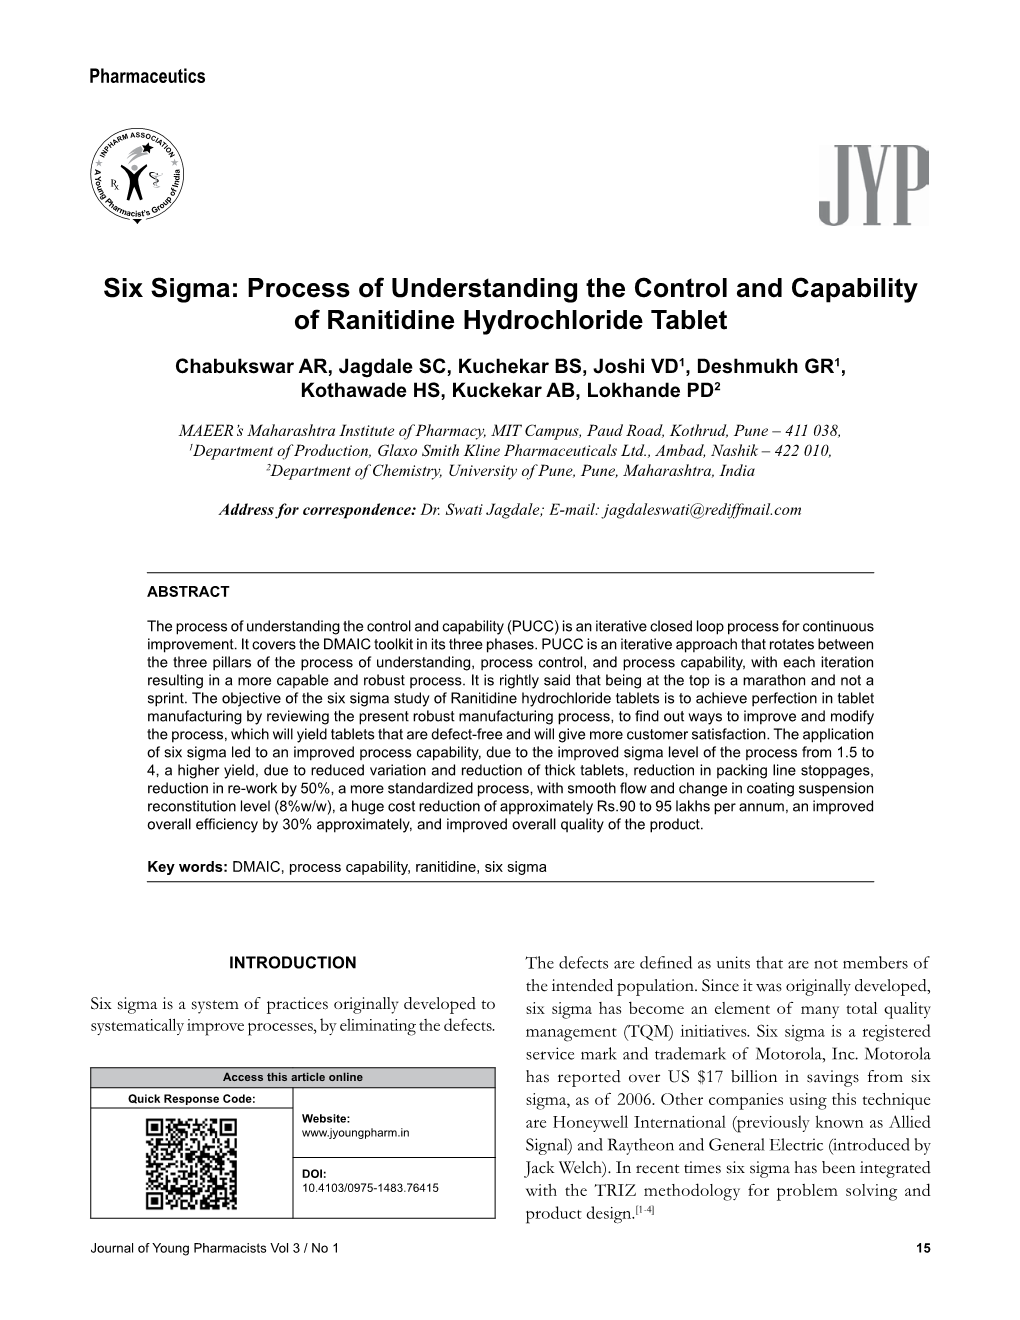 Six Sigma: Process of Understanding the Control and Capability of Ranitidine Hydrochloride Tablet